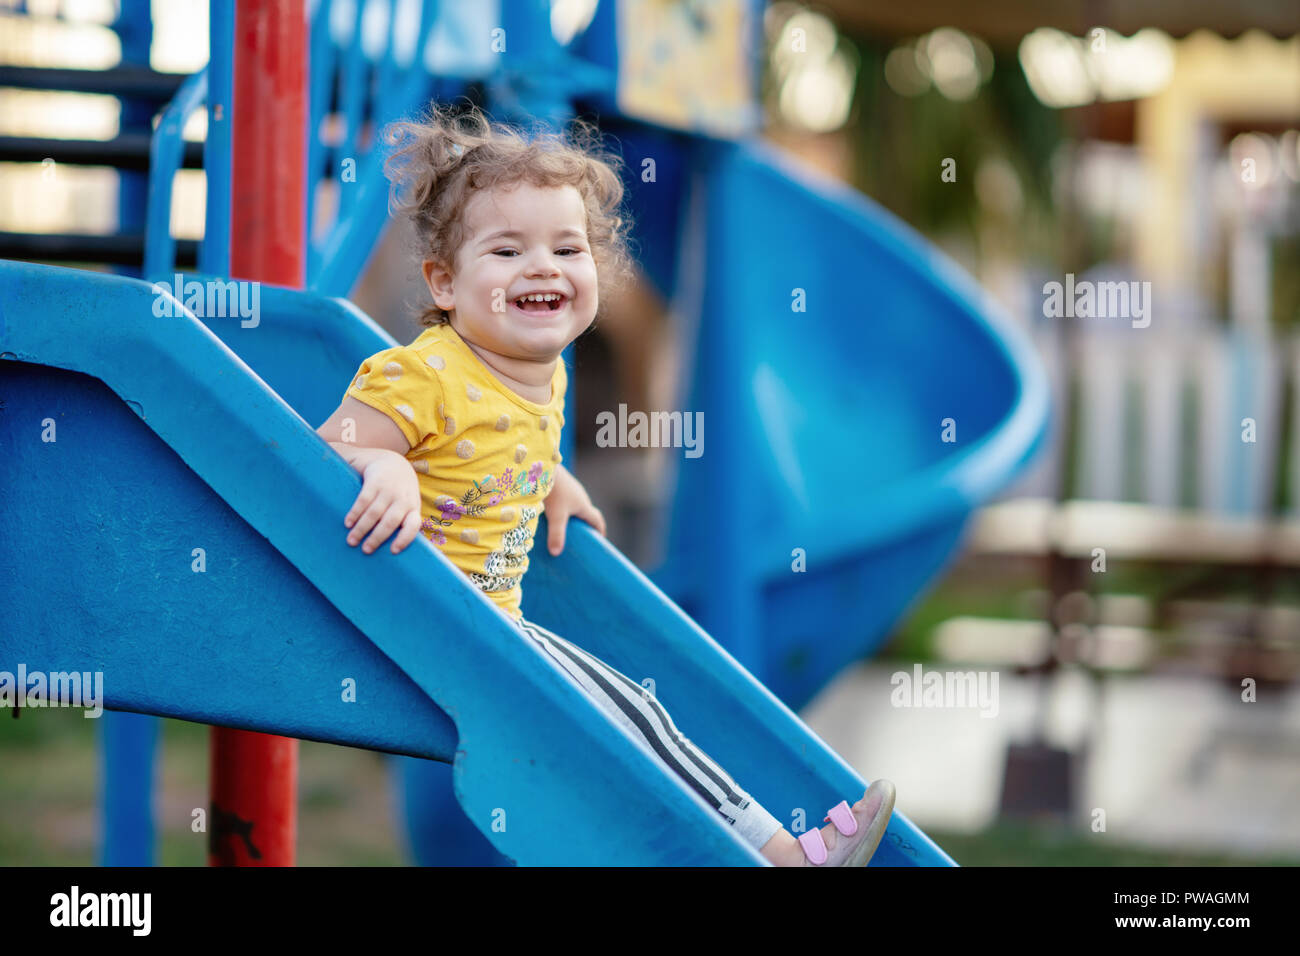 Little Toddler Playing At Playground Outdoors In Summer. Stock Photo